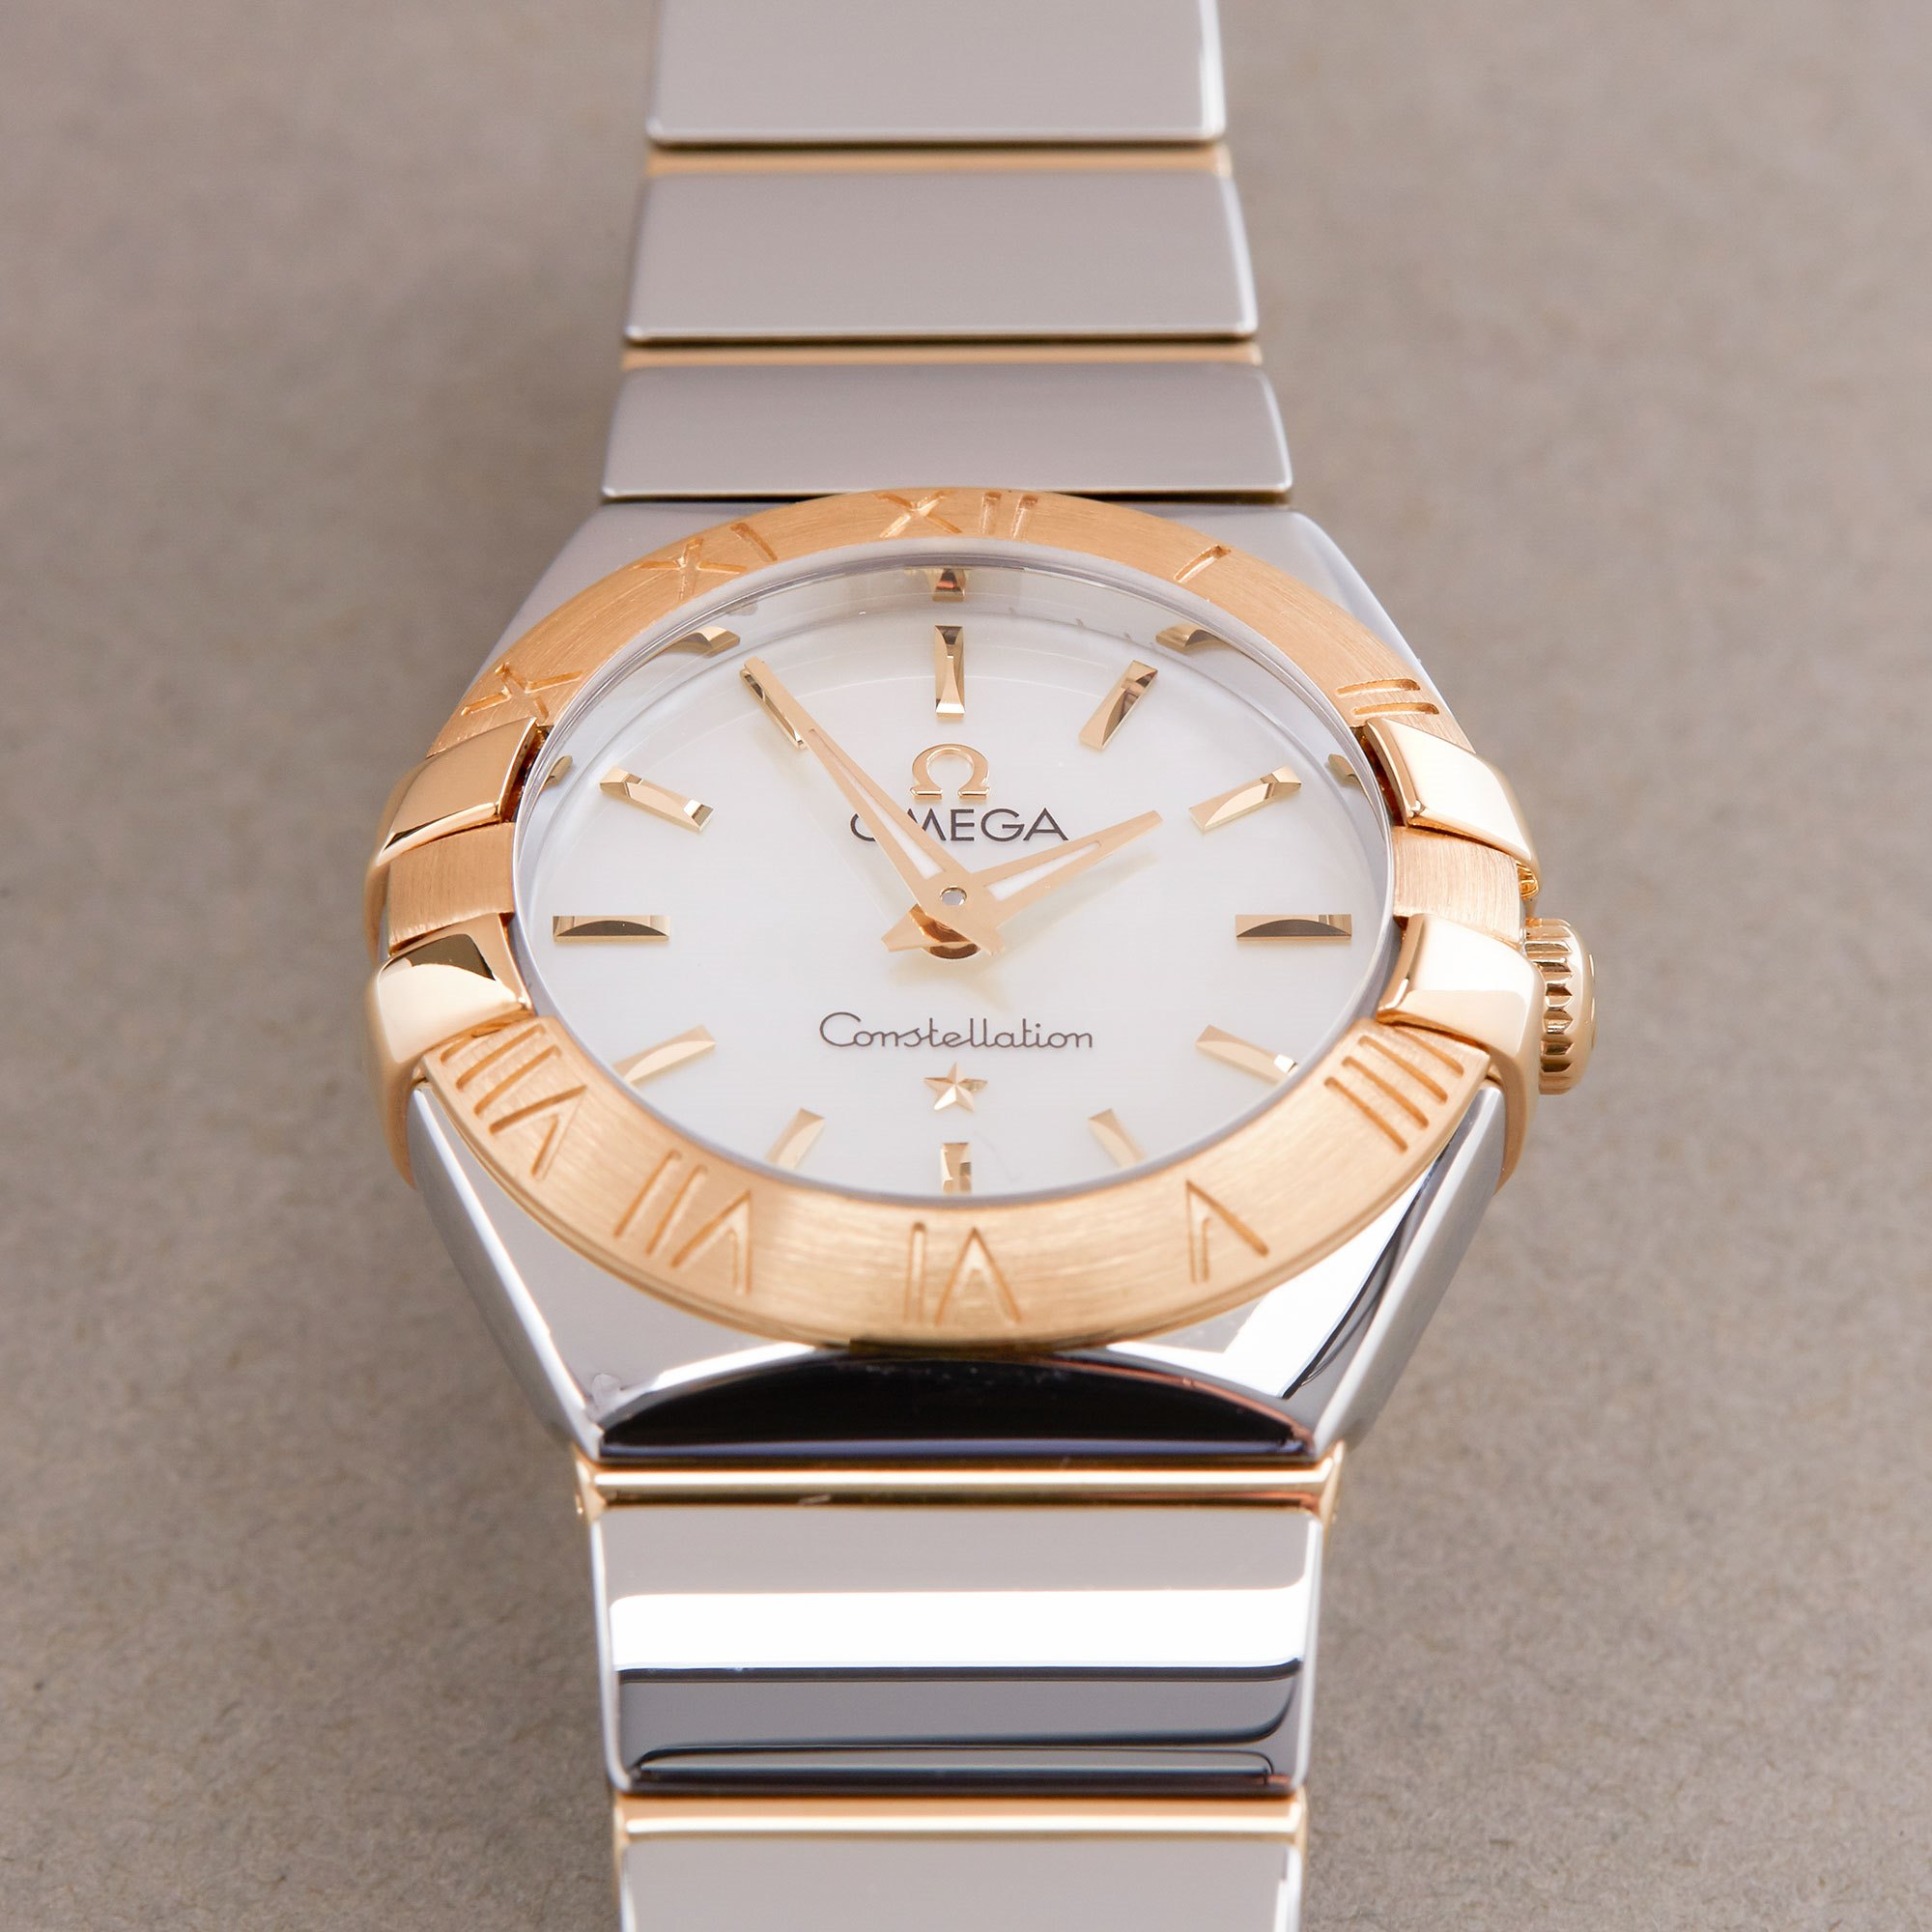 Omega Constellation 18K Yellow Gold & Stainless Steel Watch 123.20.24.60.05.002 - Image 8 of 12